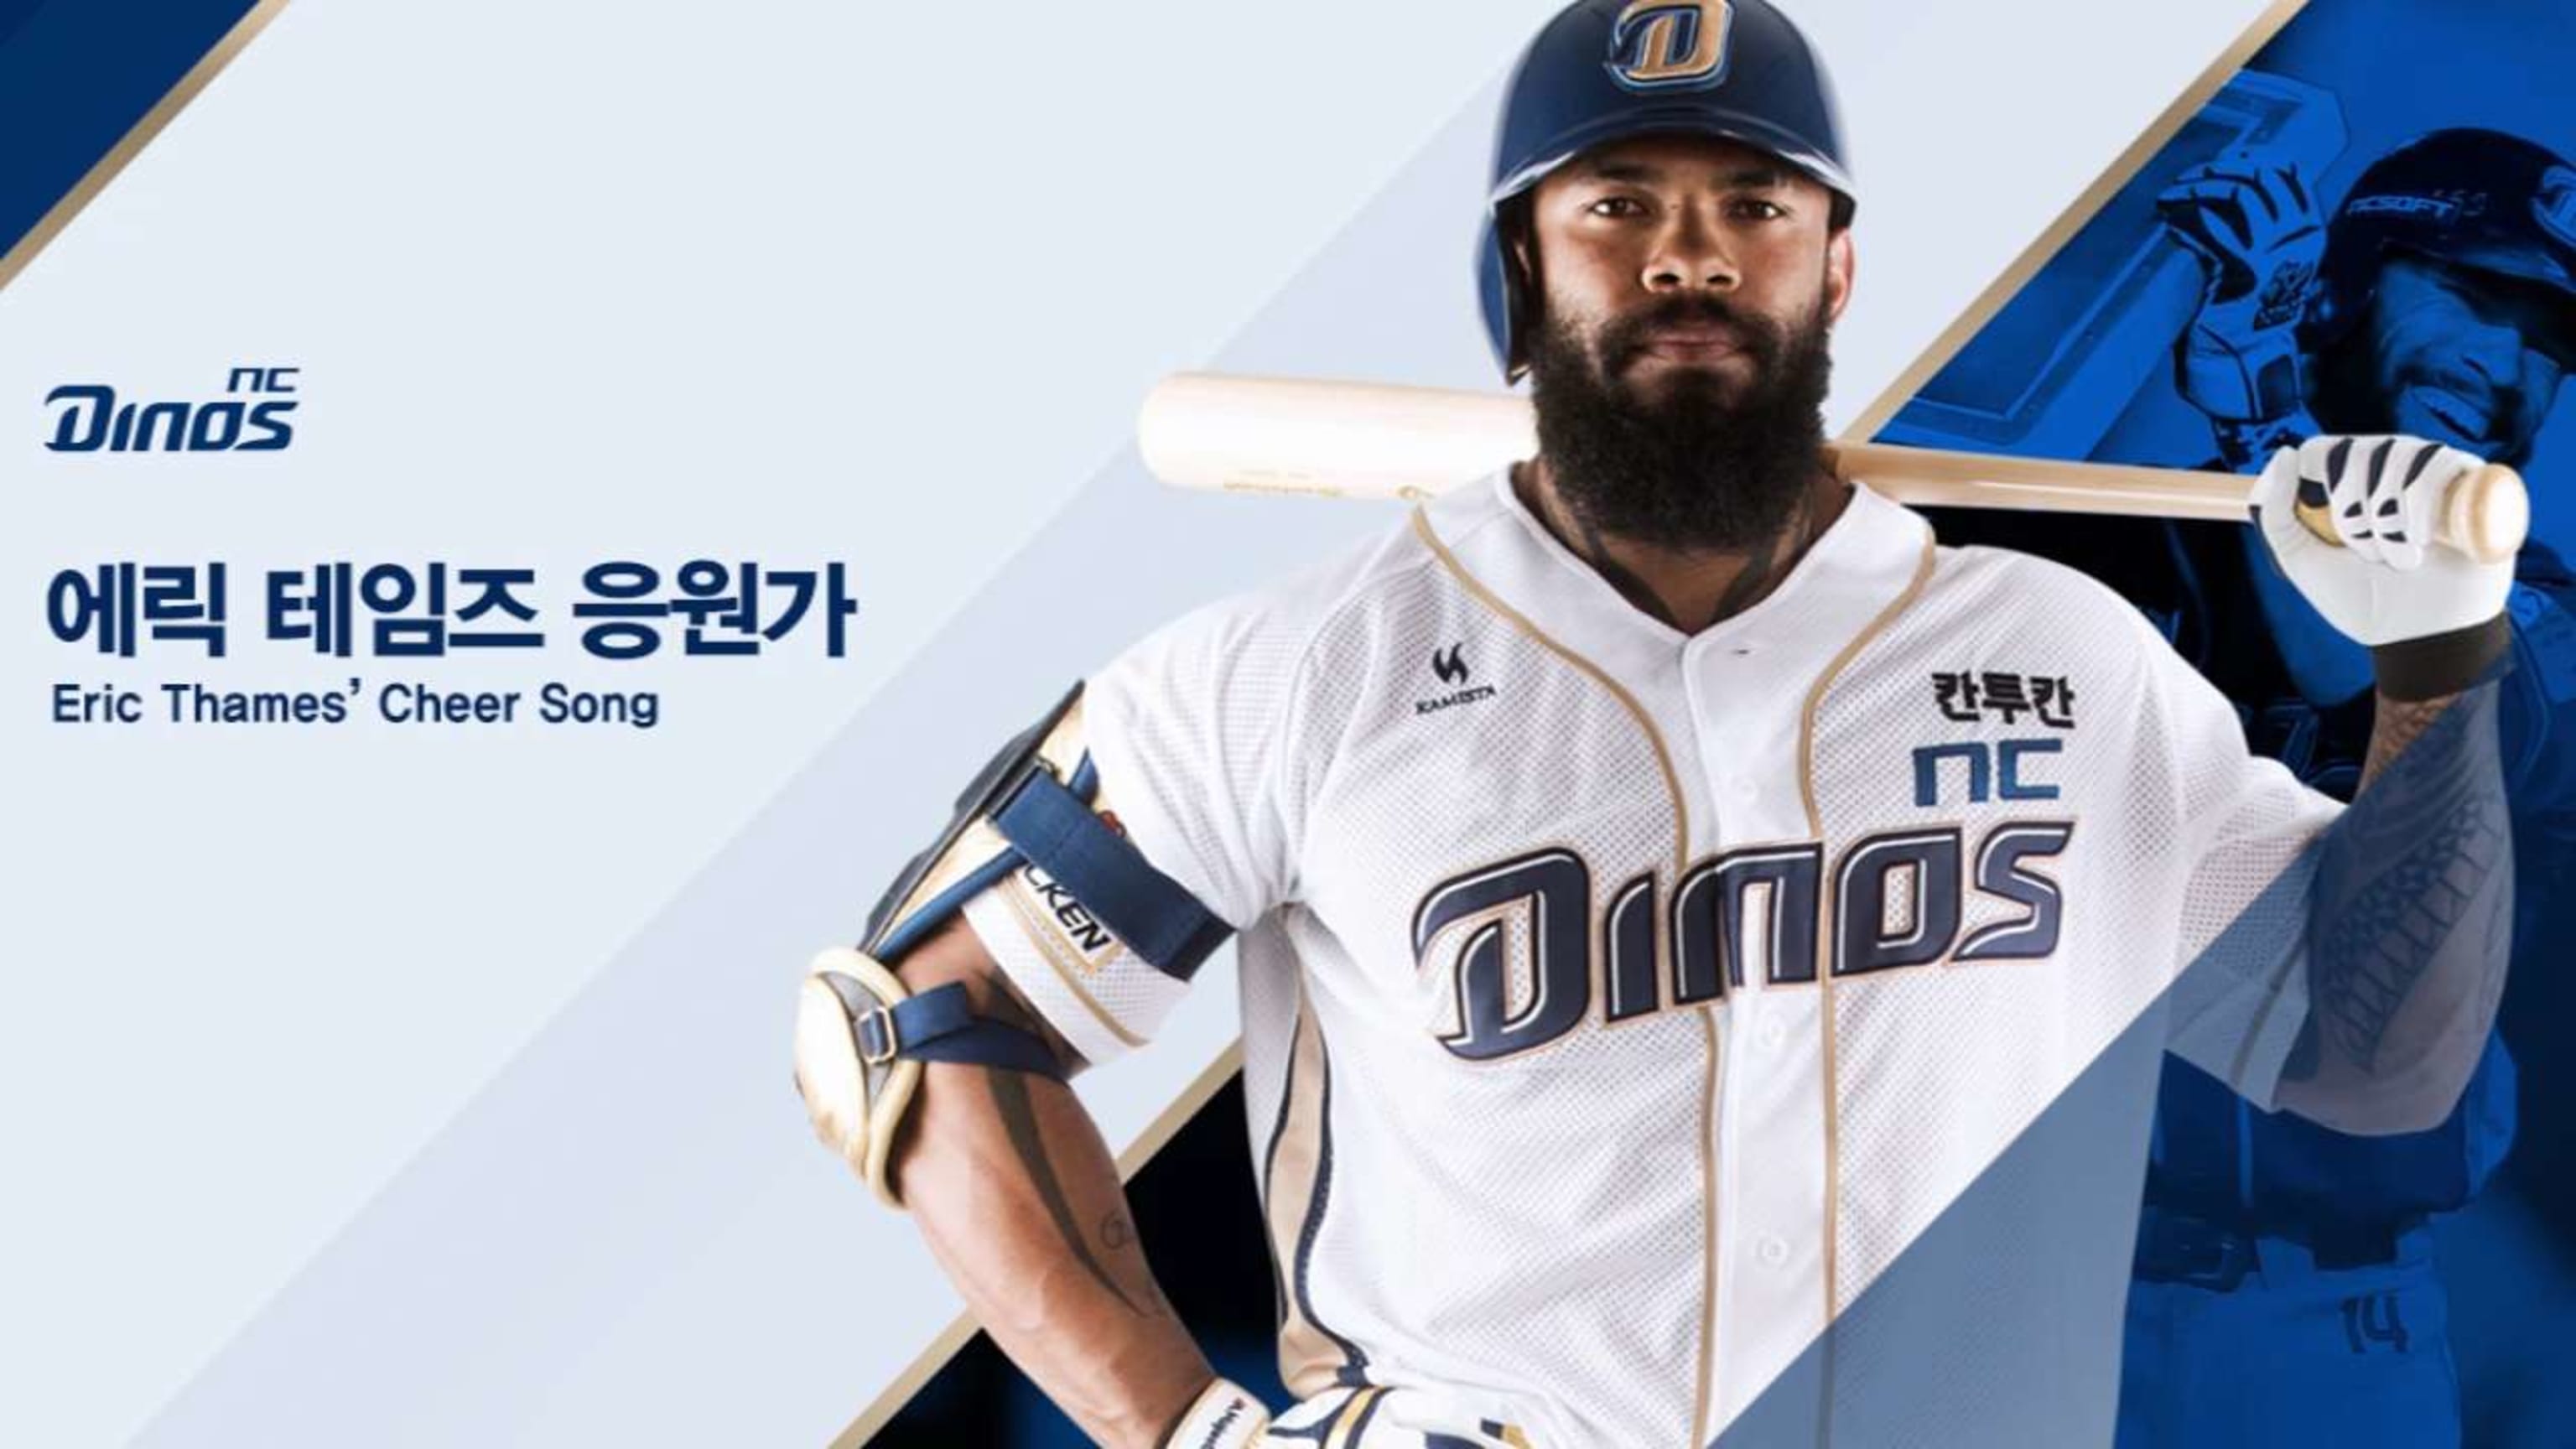 Eric Thames has his own Korean cheer song, and his Brewers teammates can't  get enough of it